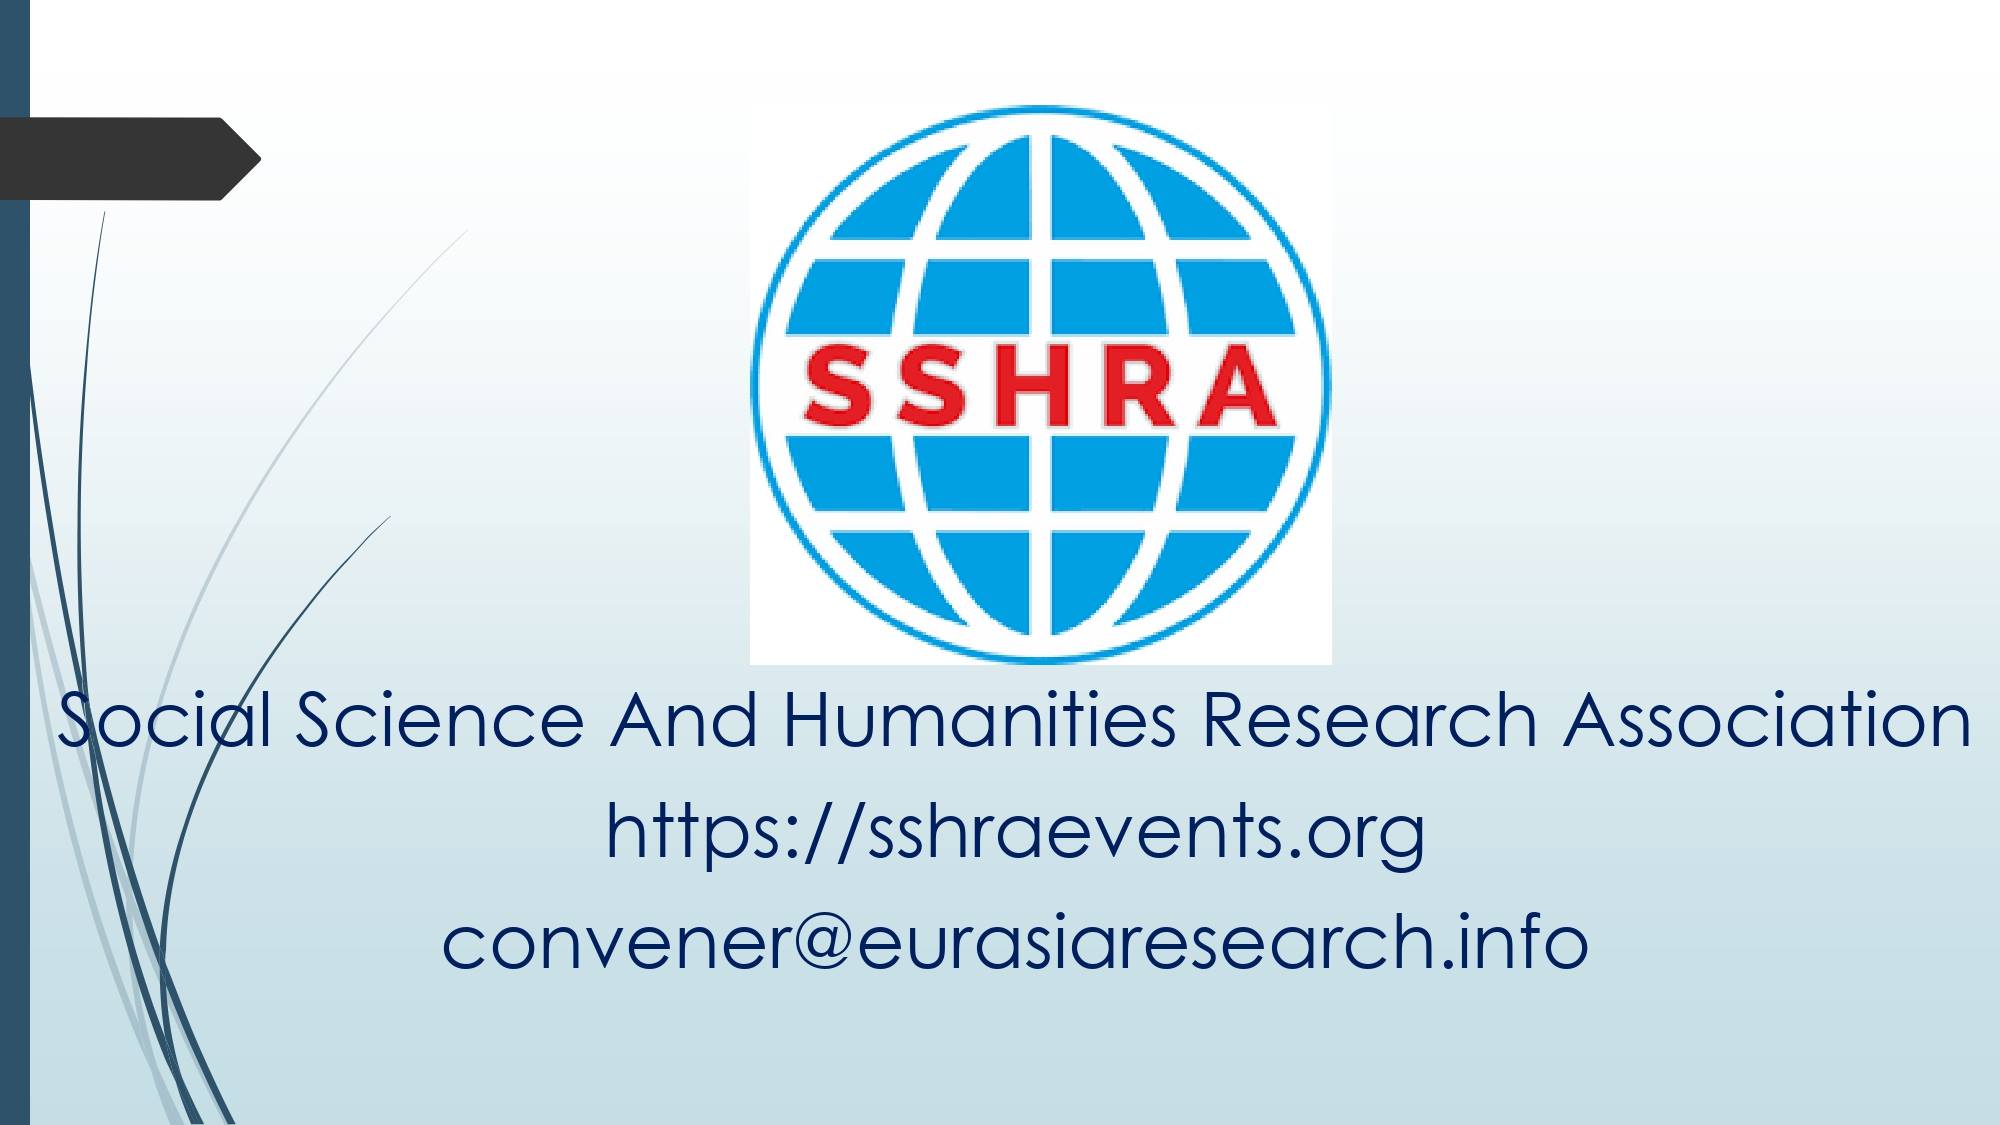 8th London – International Conference on Social Science & Humanities (ICSSH), 26-27 April 2022